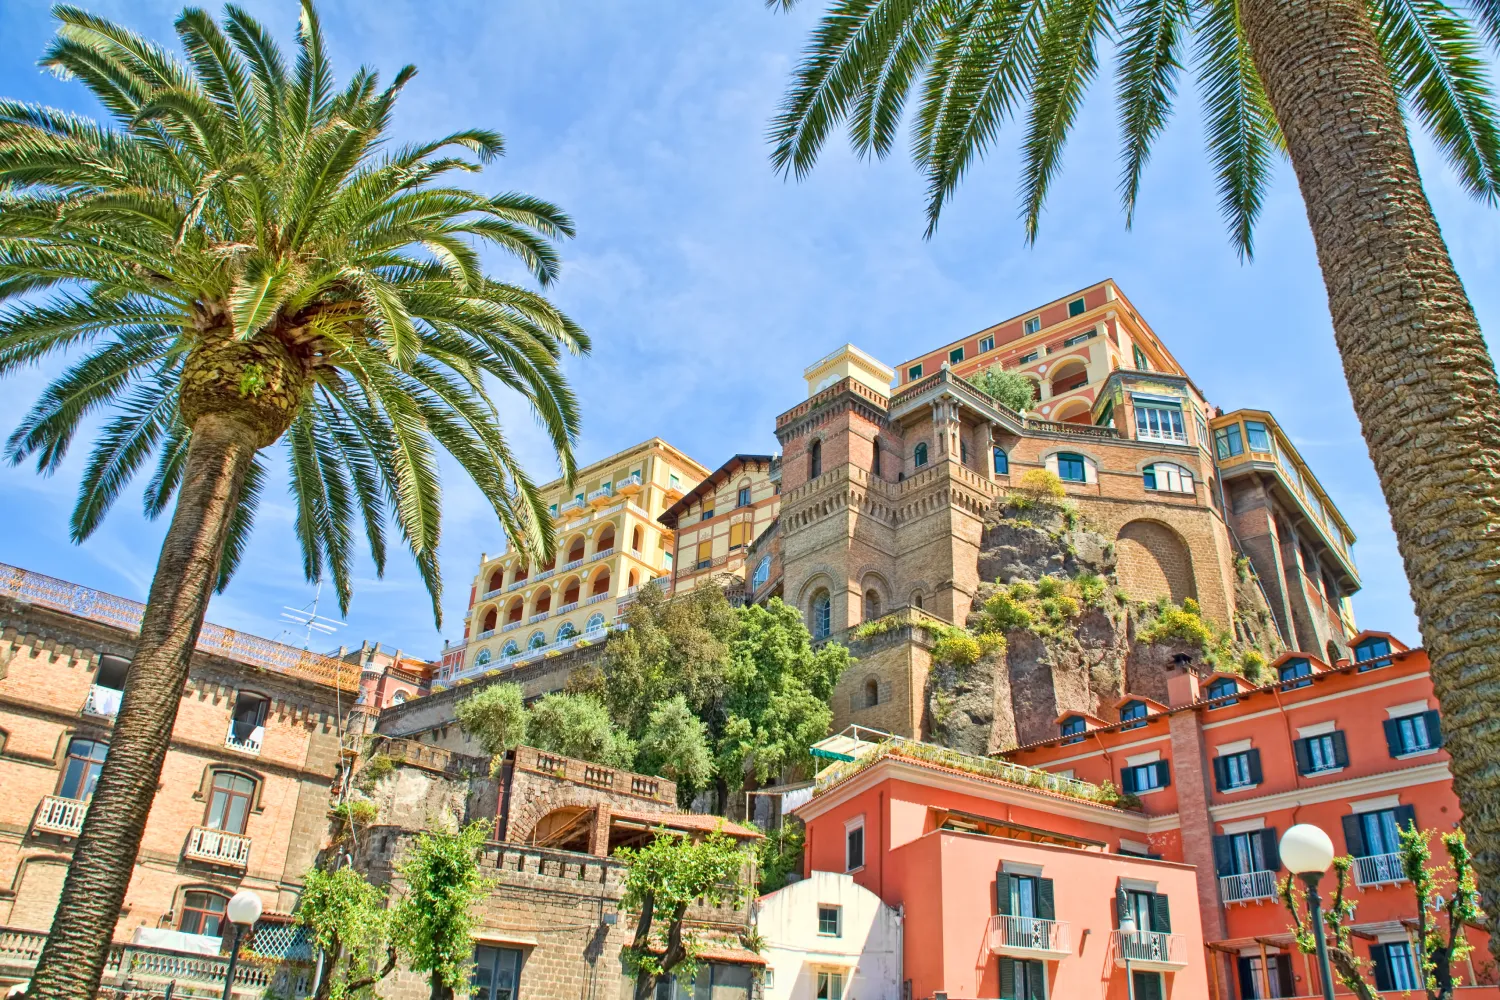 Pine trees and Historic Hotels in Sorrento